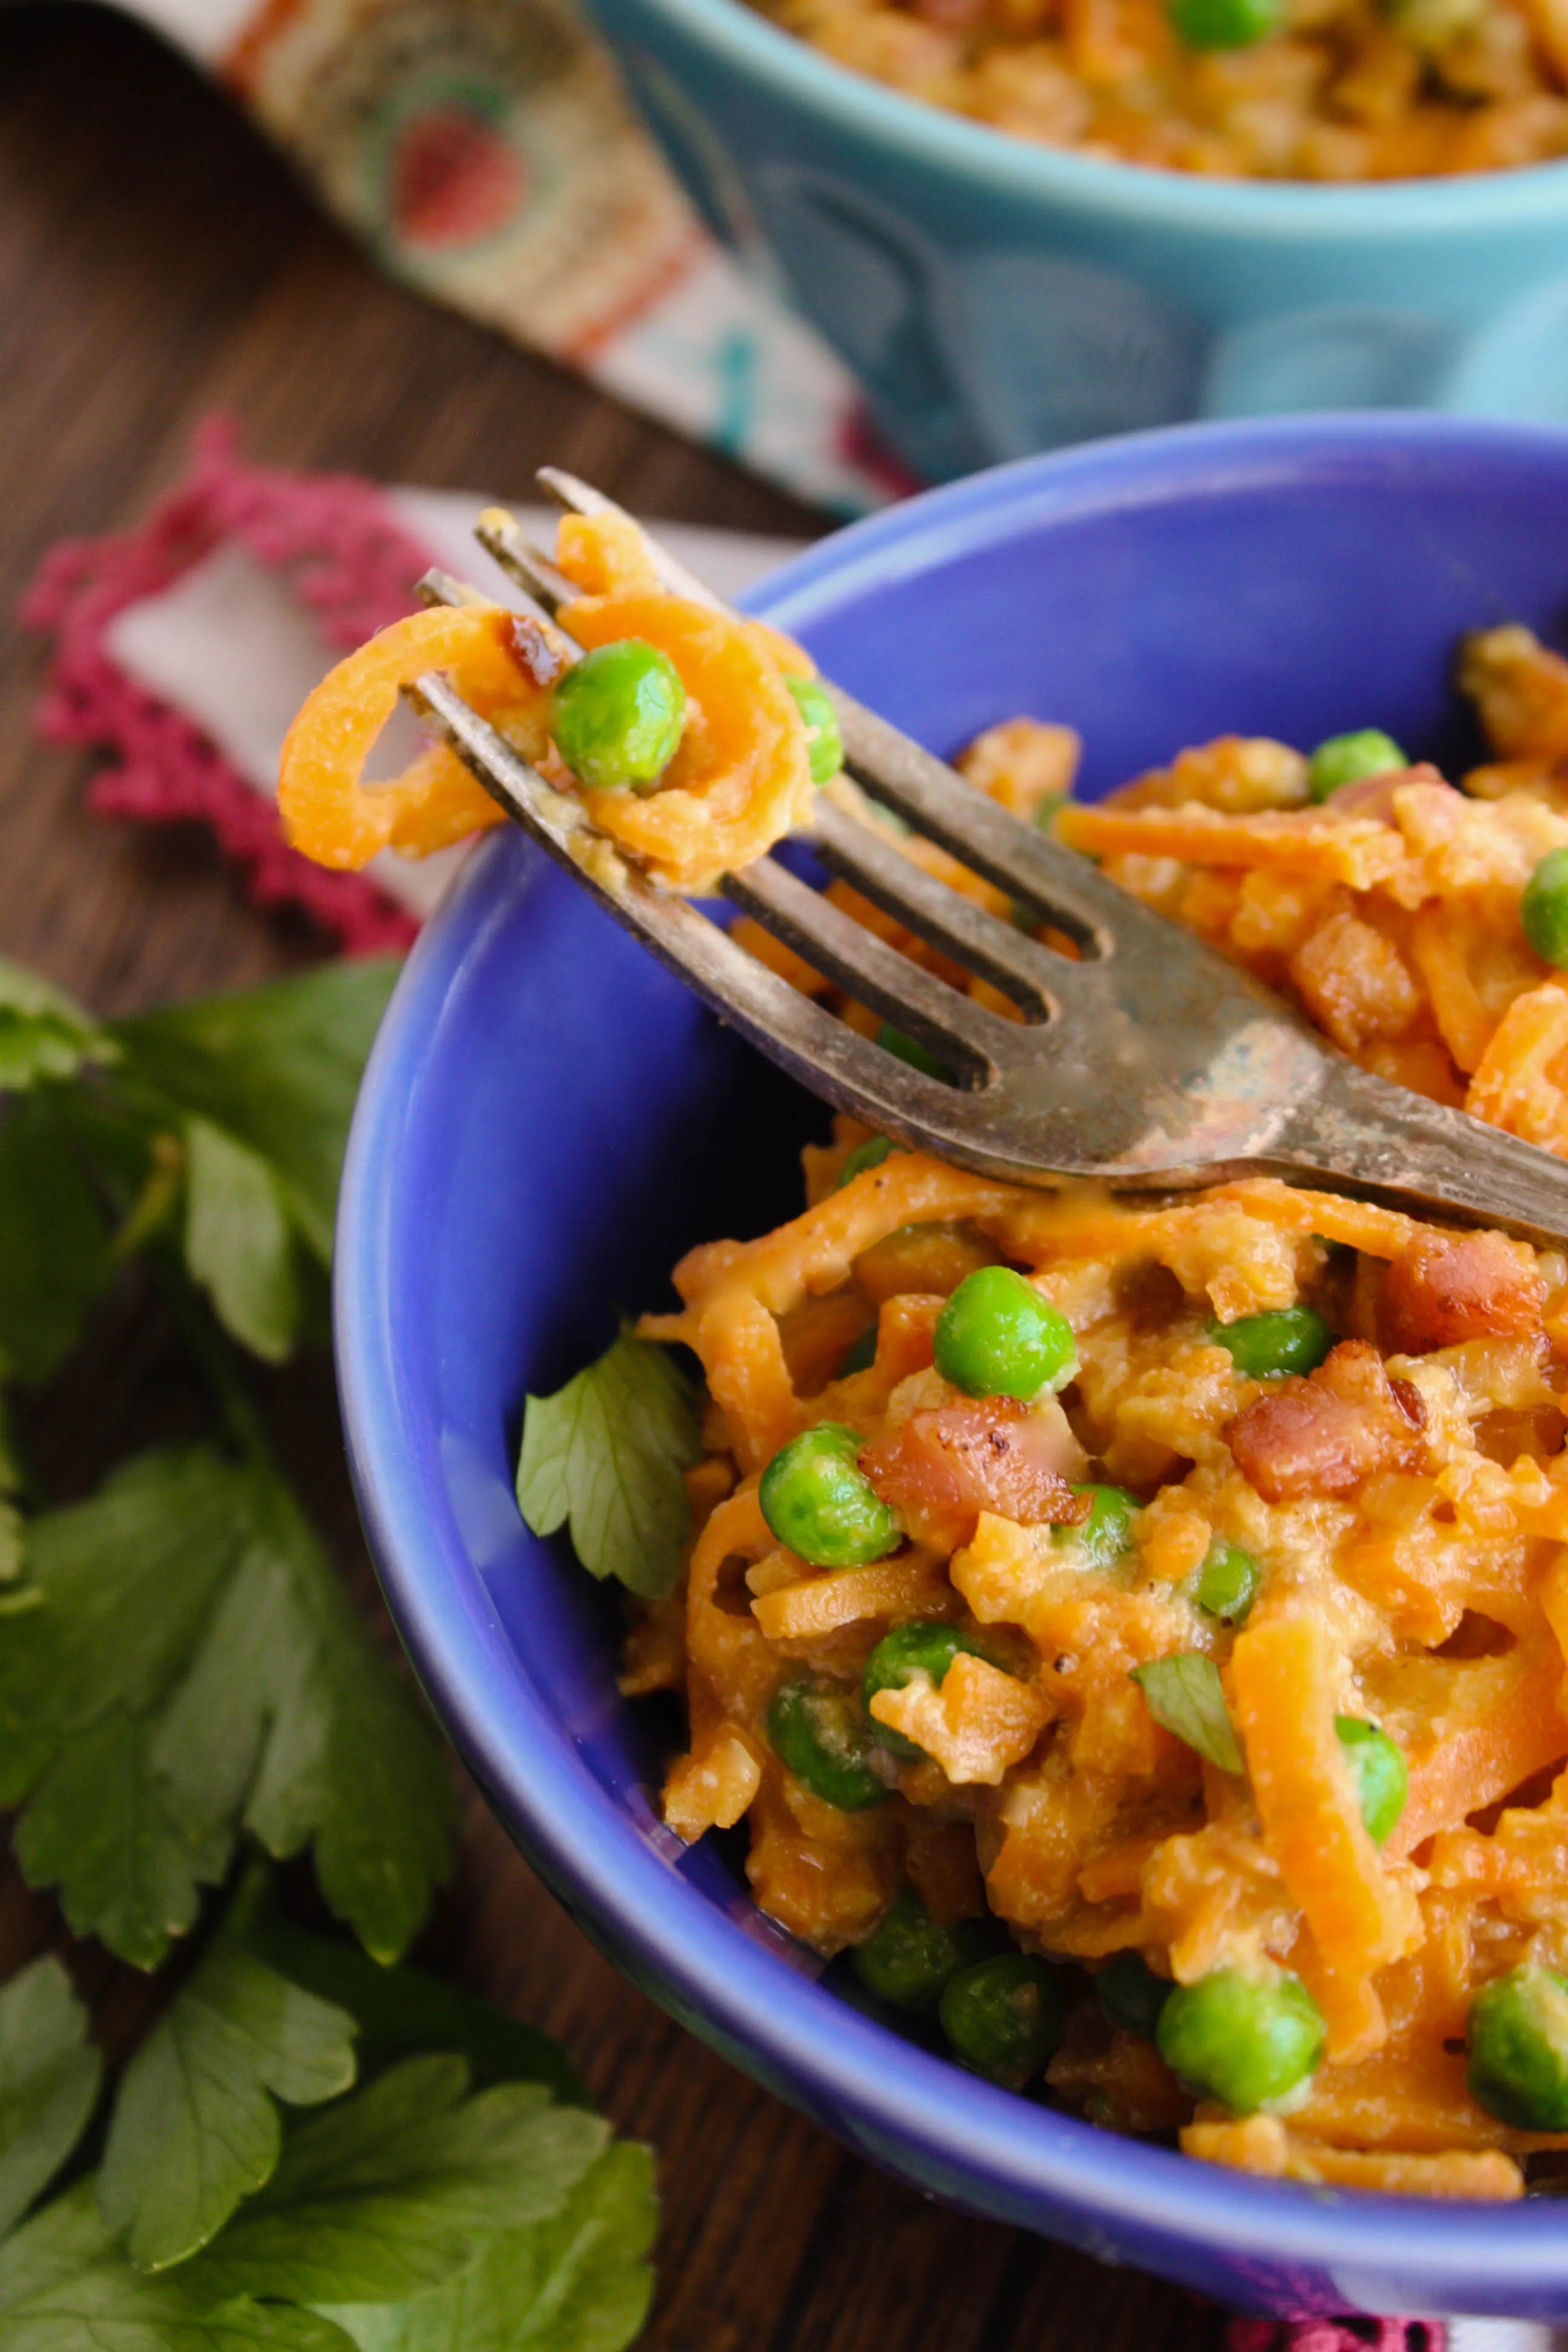 Sweet potato carbonara is a fun and flavorul dish. Use sweet potato instead of pasta to twirl and twirl!